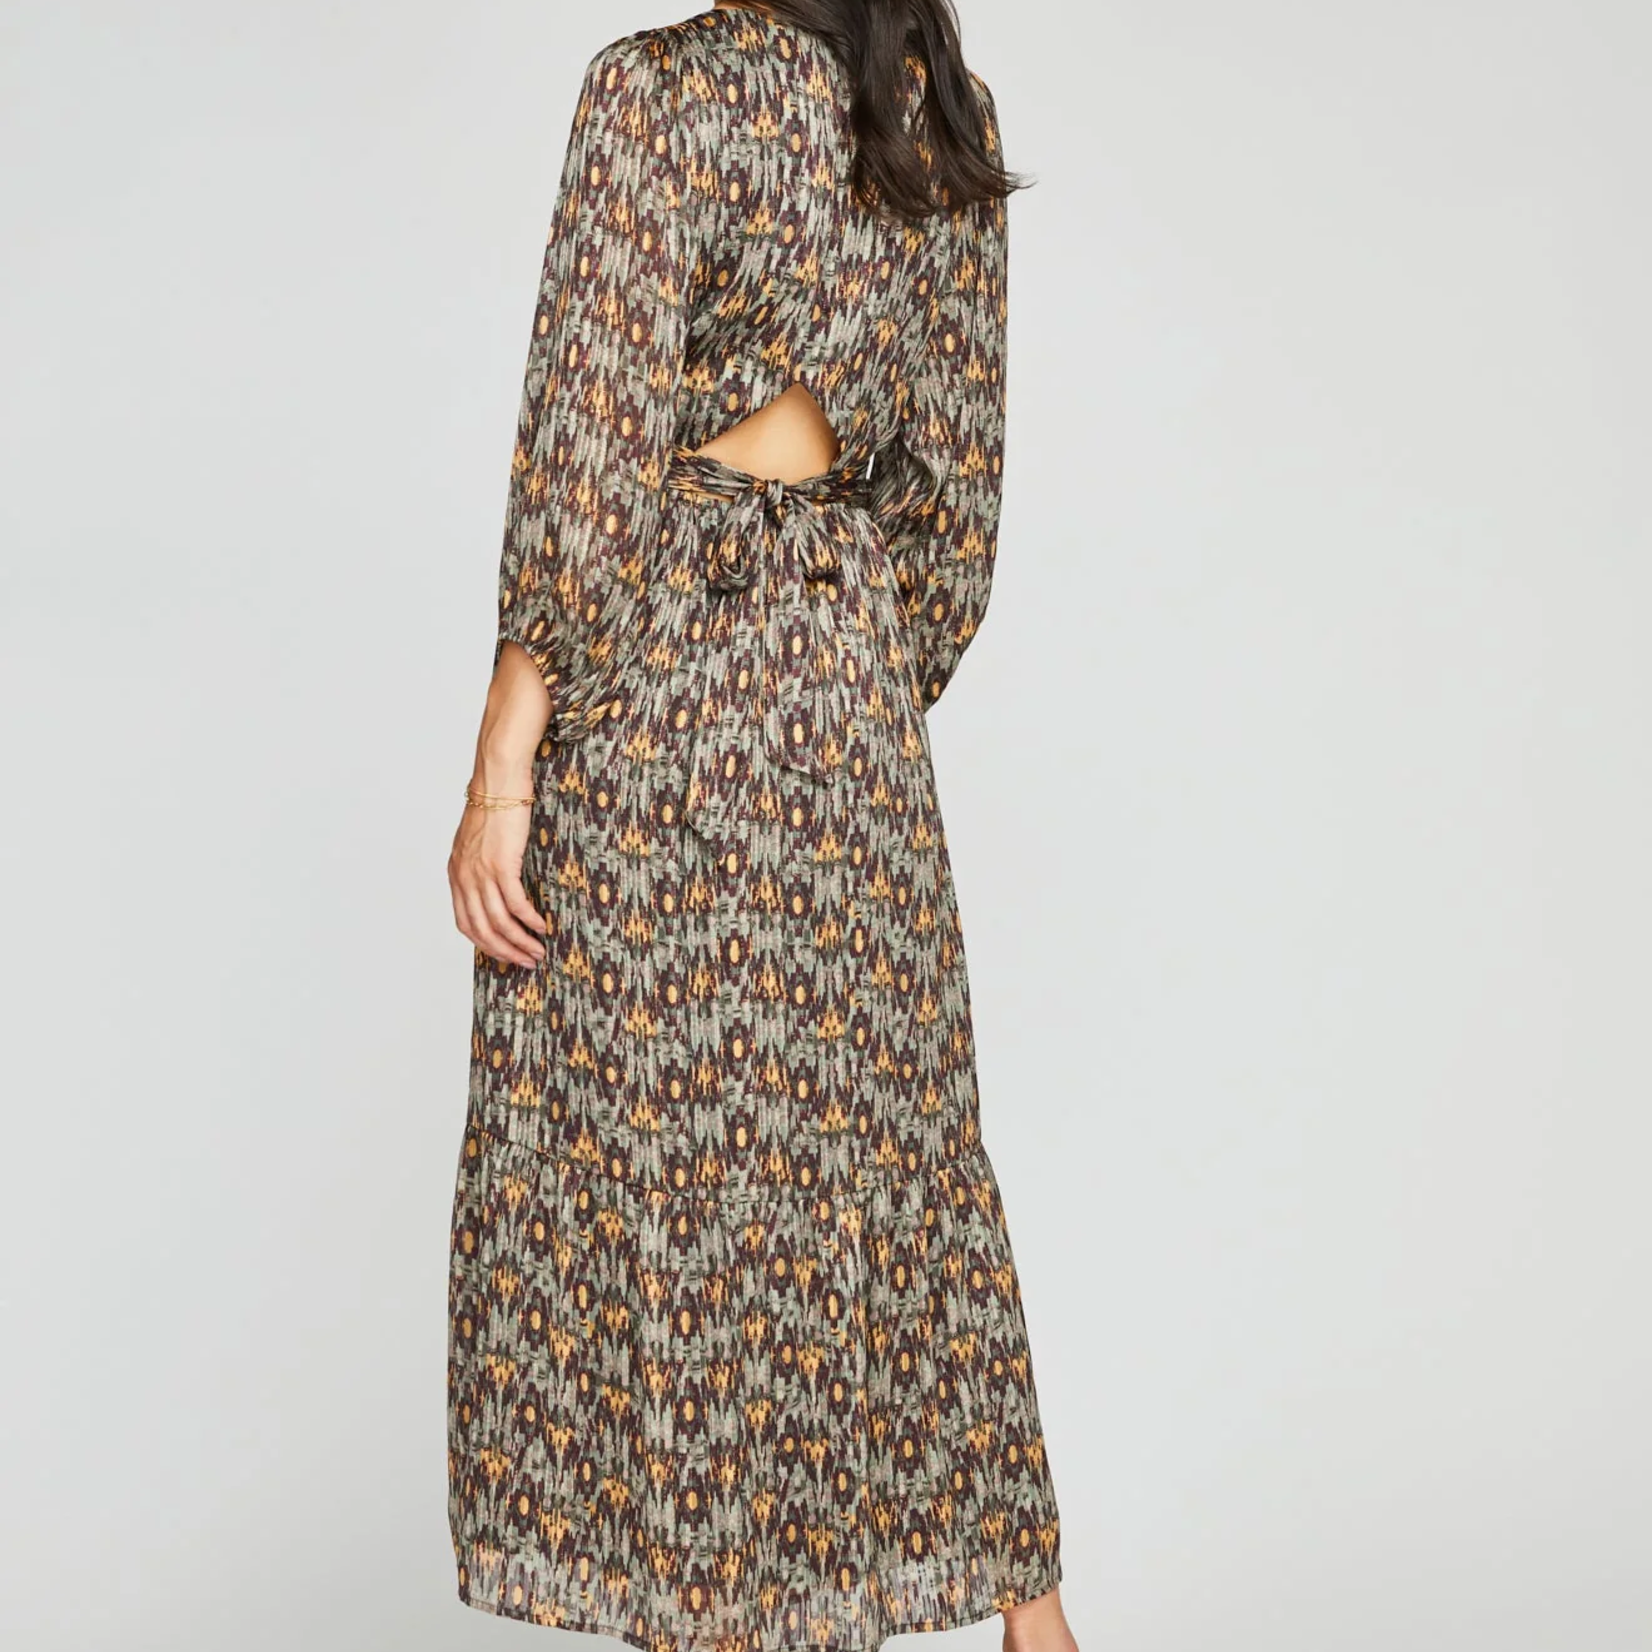 Gentle Fawn Beatrice Maxi Dress